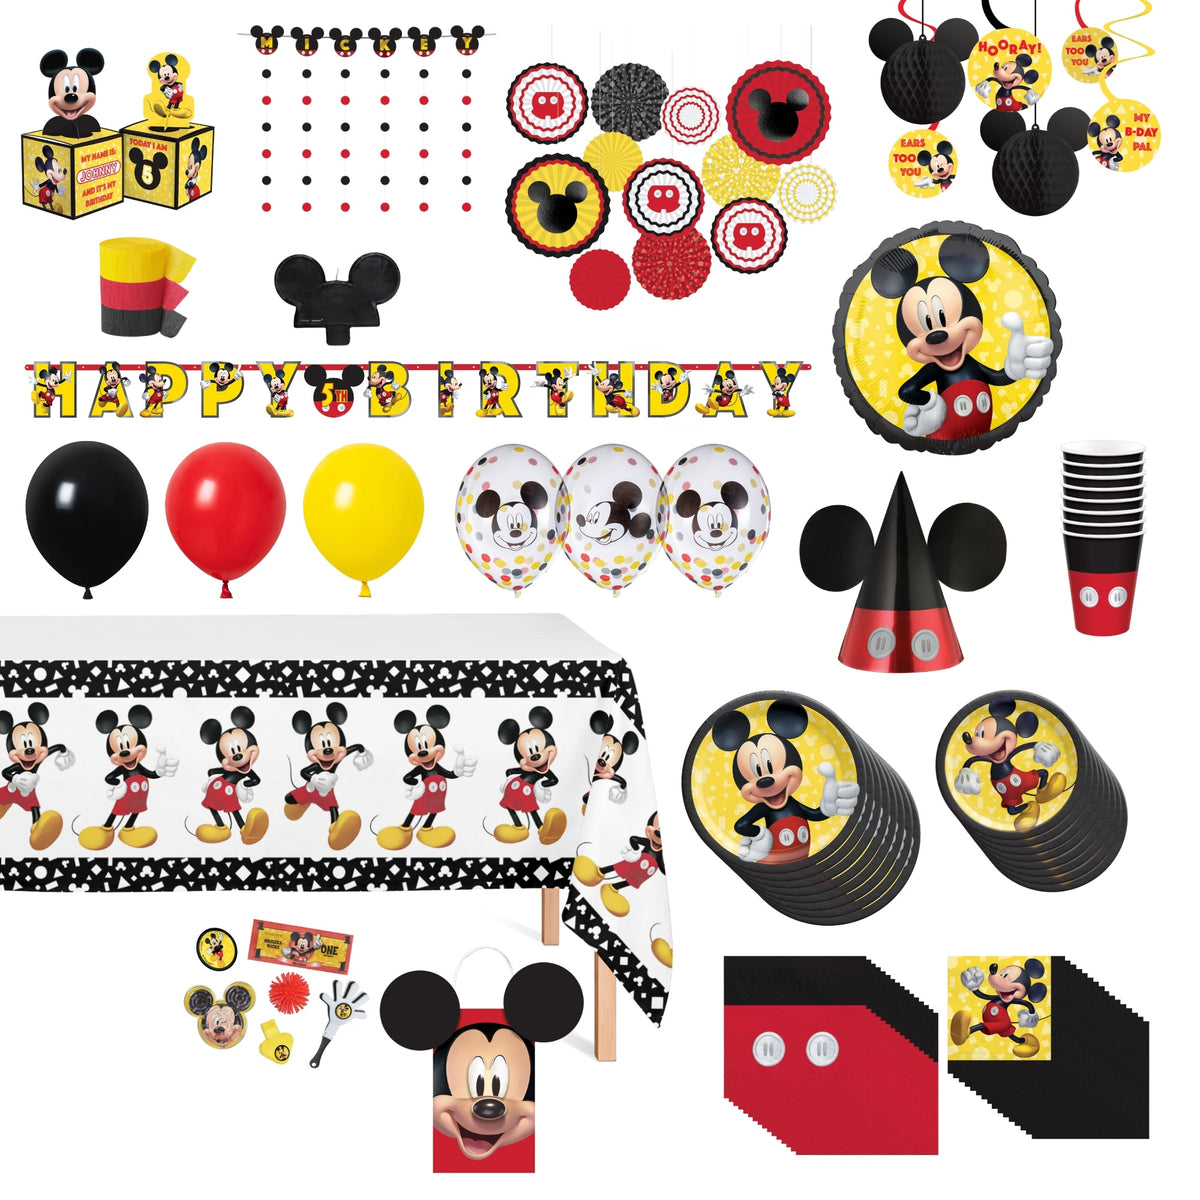 Party Expert Kids Birthday Disney Mickey Mouse Ultimate Birthday Party Supplies Kit